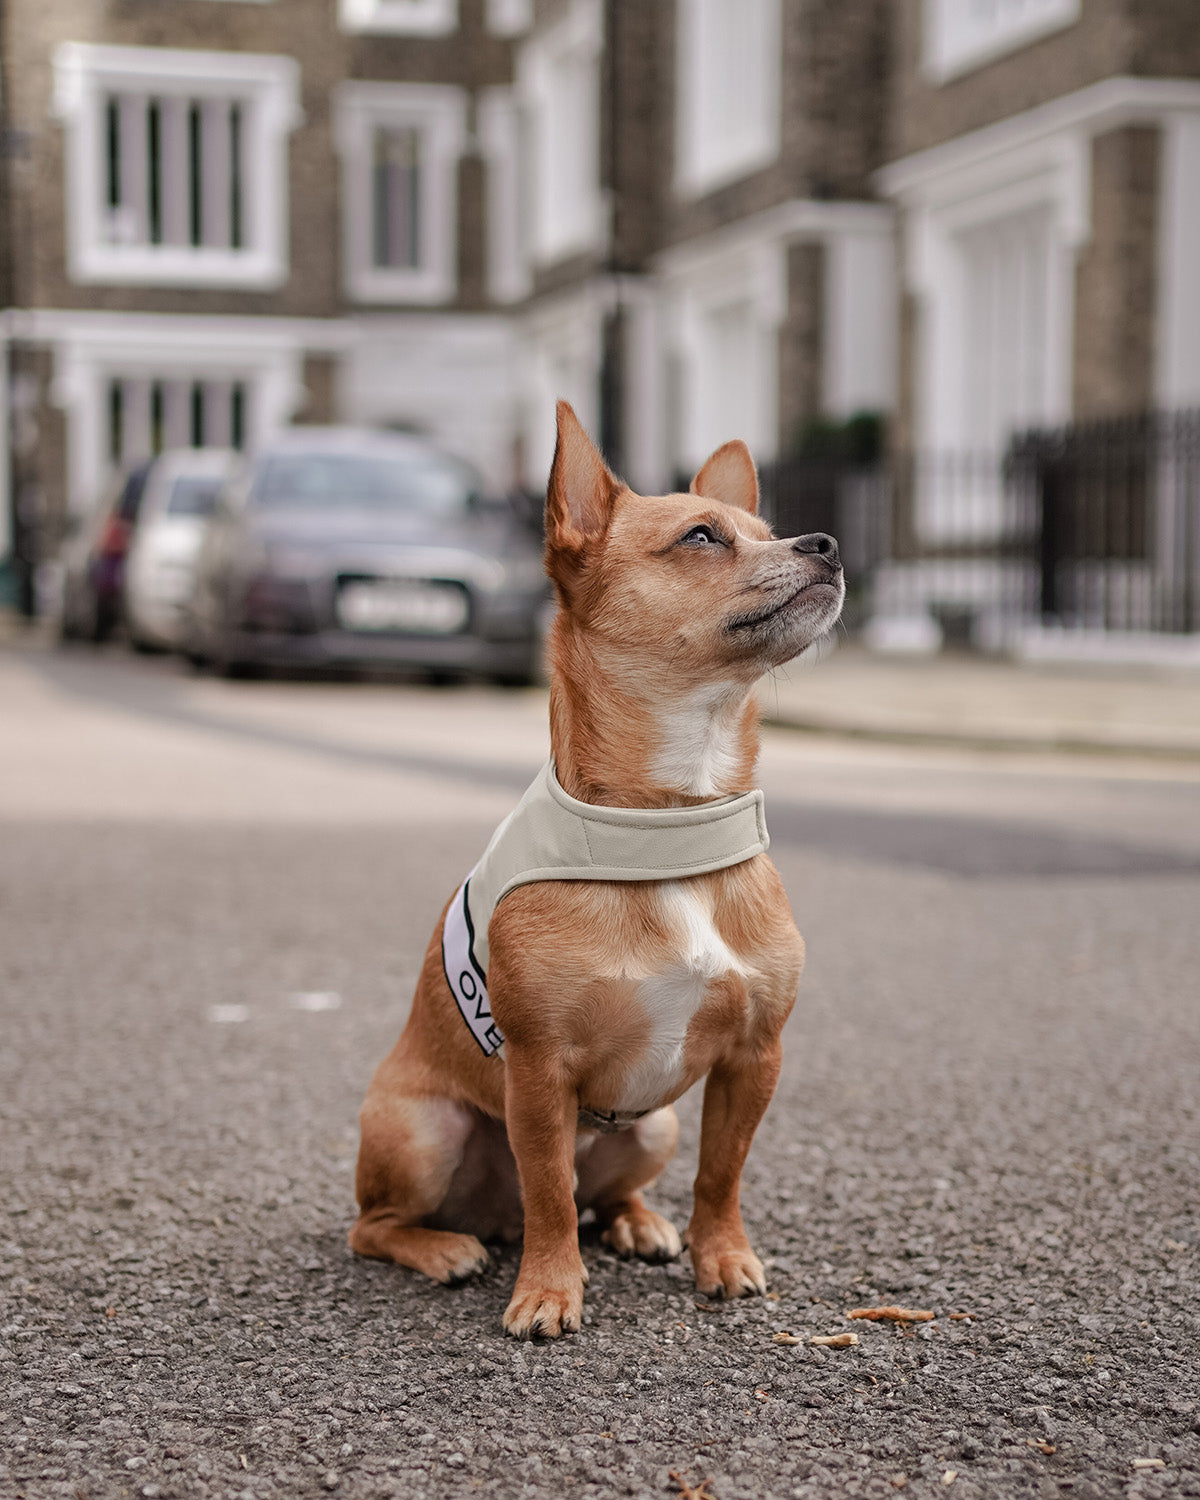 A dog wearing an Over Glam harness in the street